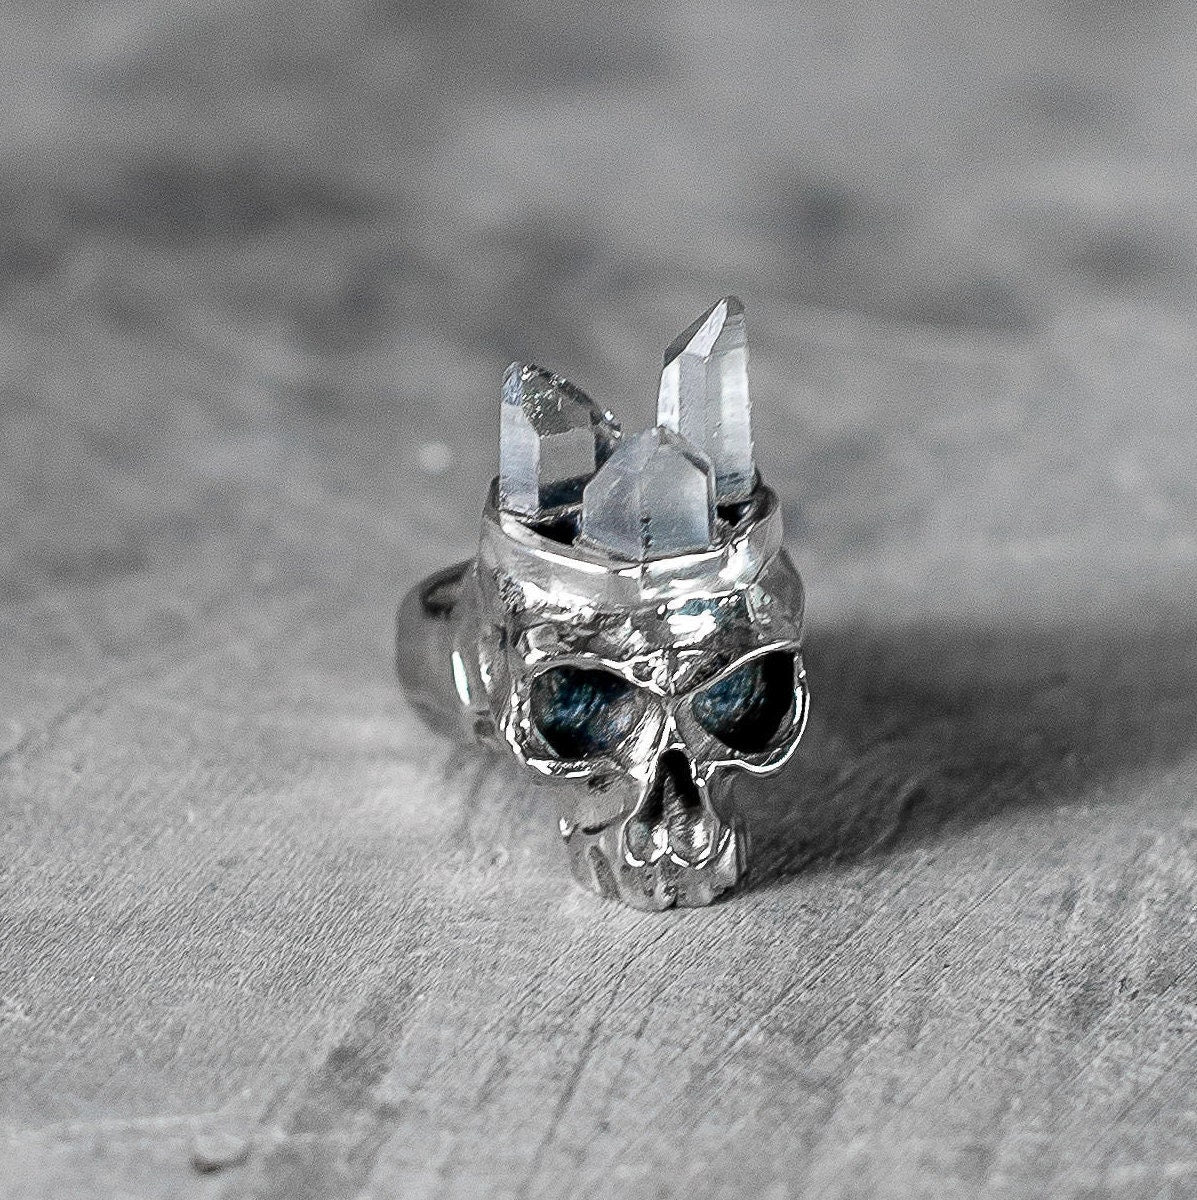 Crystal or Tourmaline Crowned Skull Ring in Solid Silver with Topaz Eyes